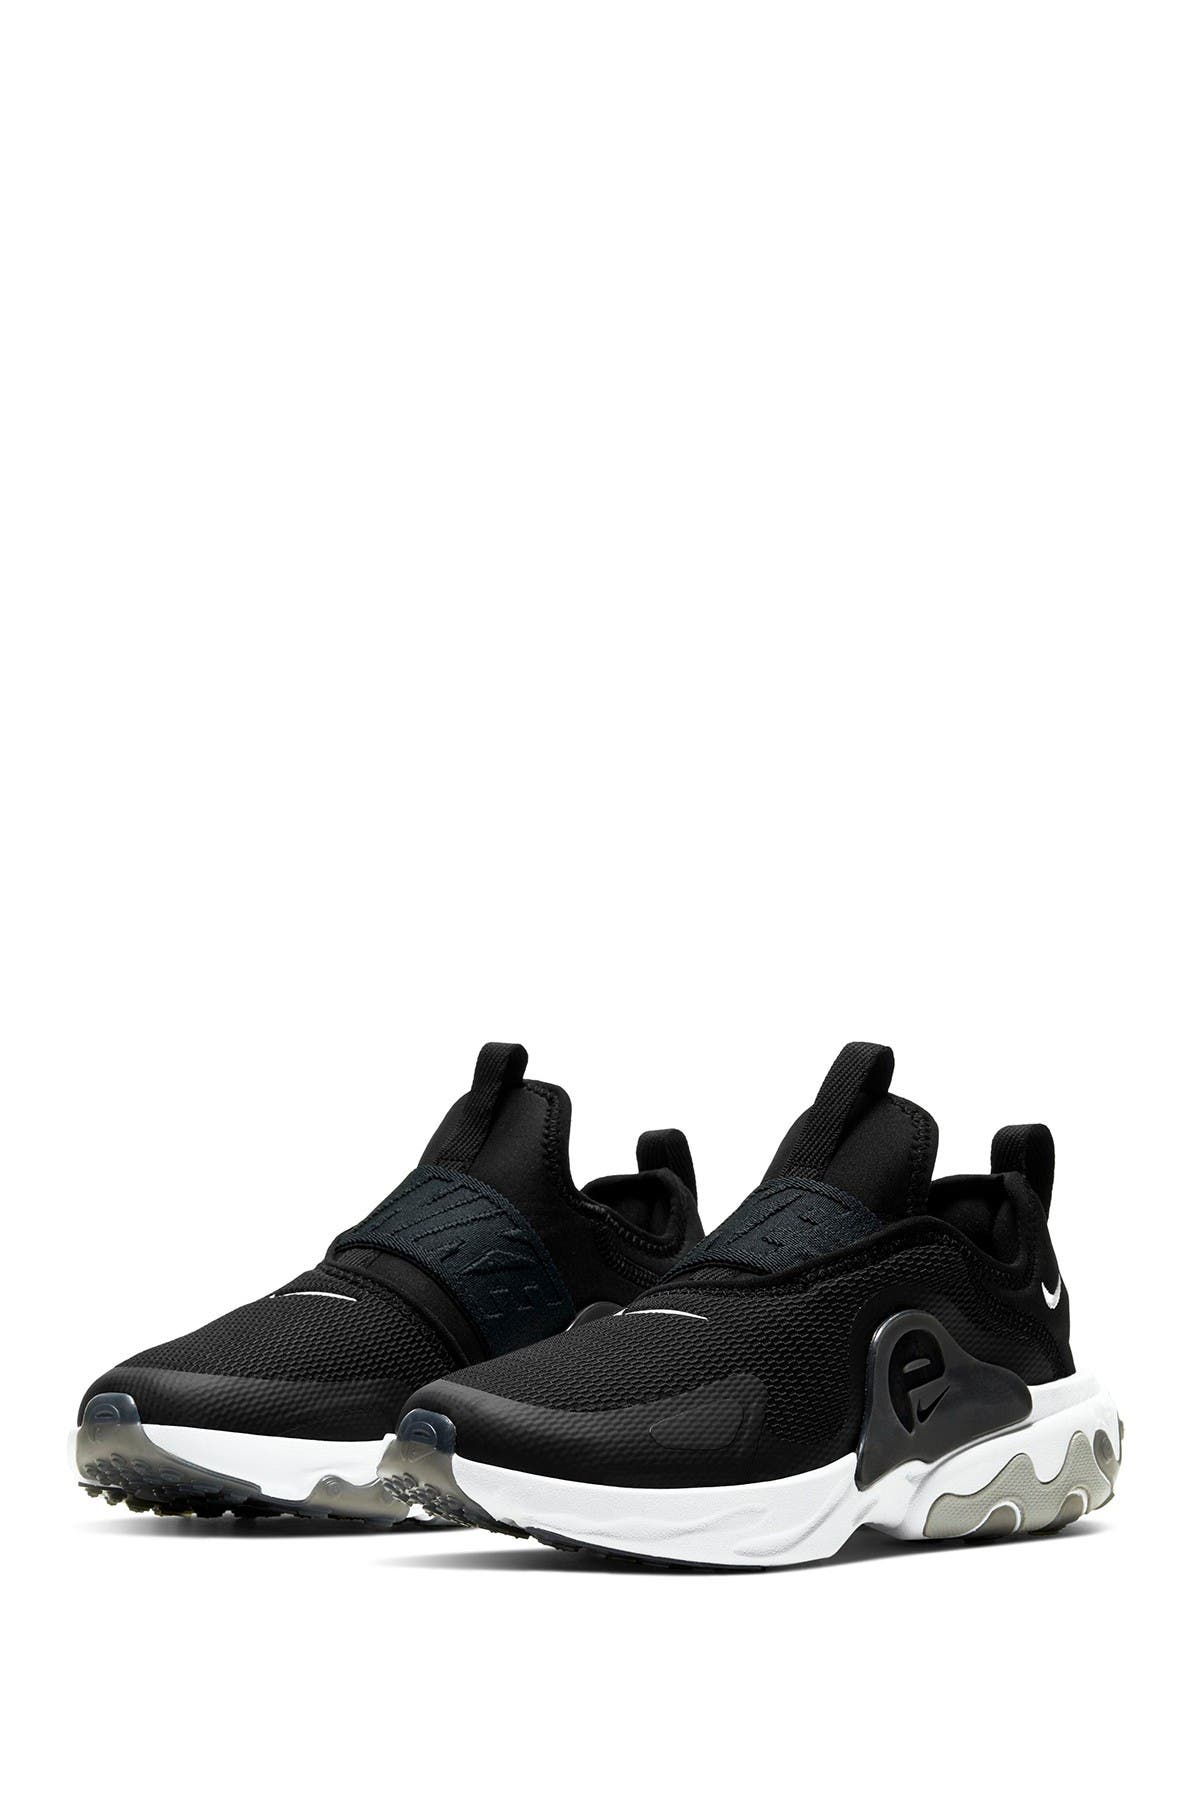 nike presto extreme with laces